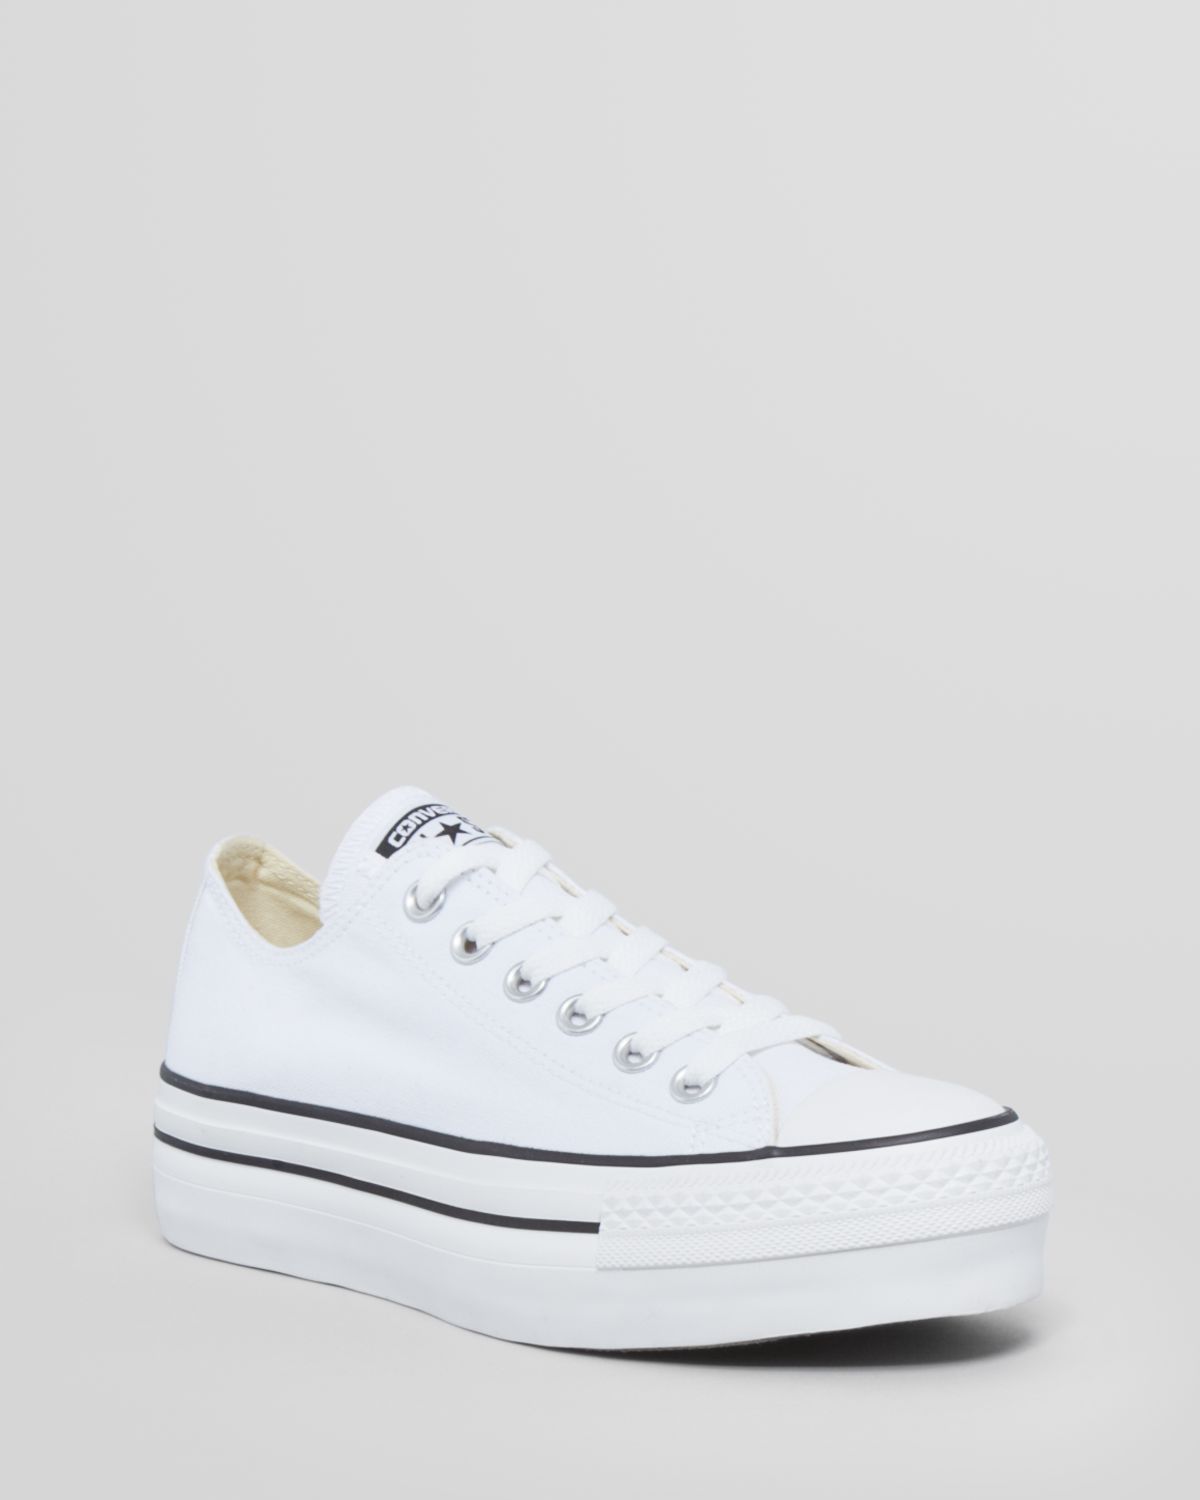 Converse Lace Up Platform Sneakers All Star in White | Lyst